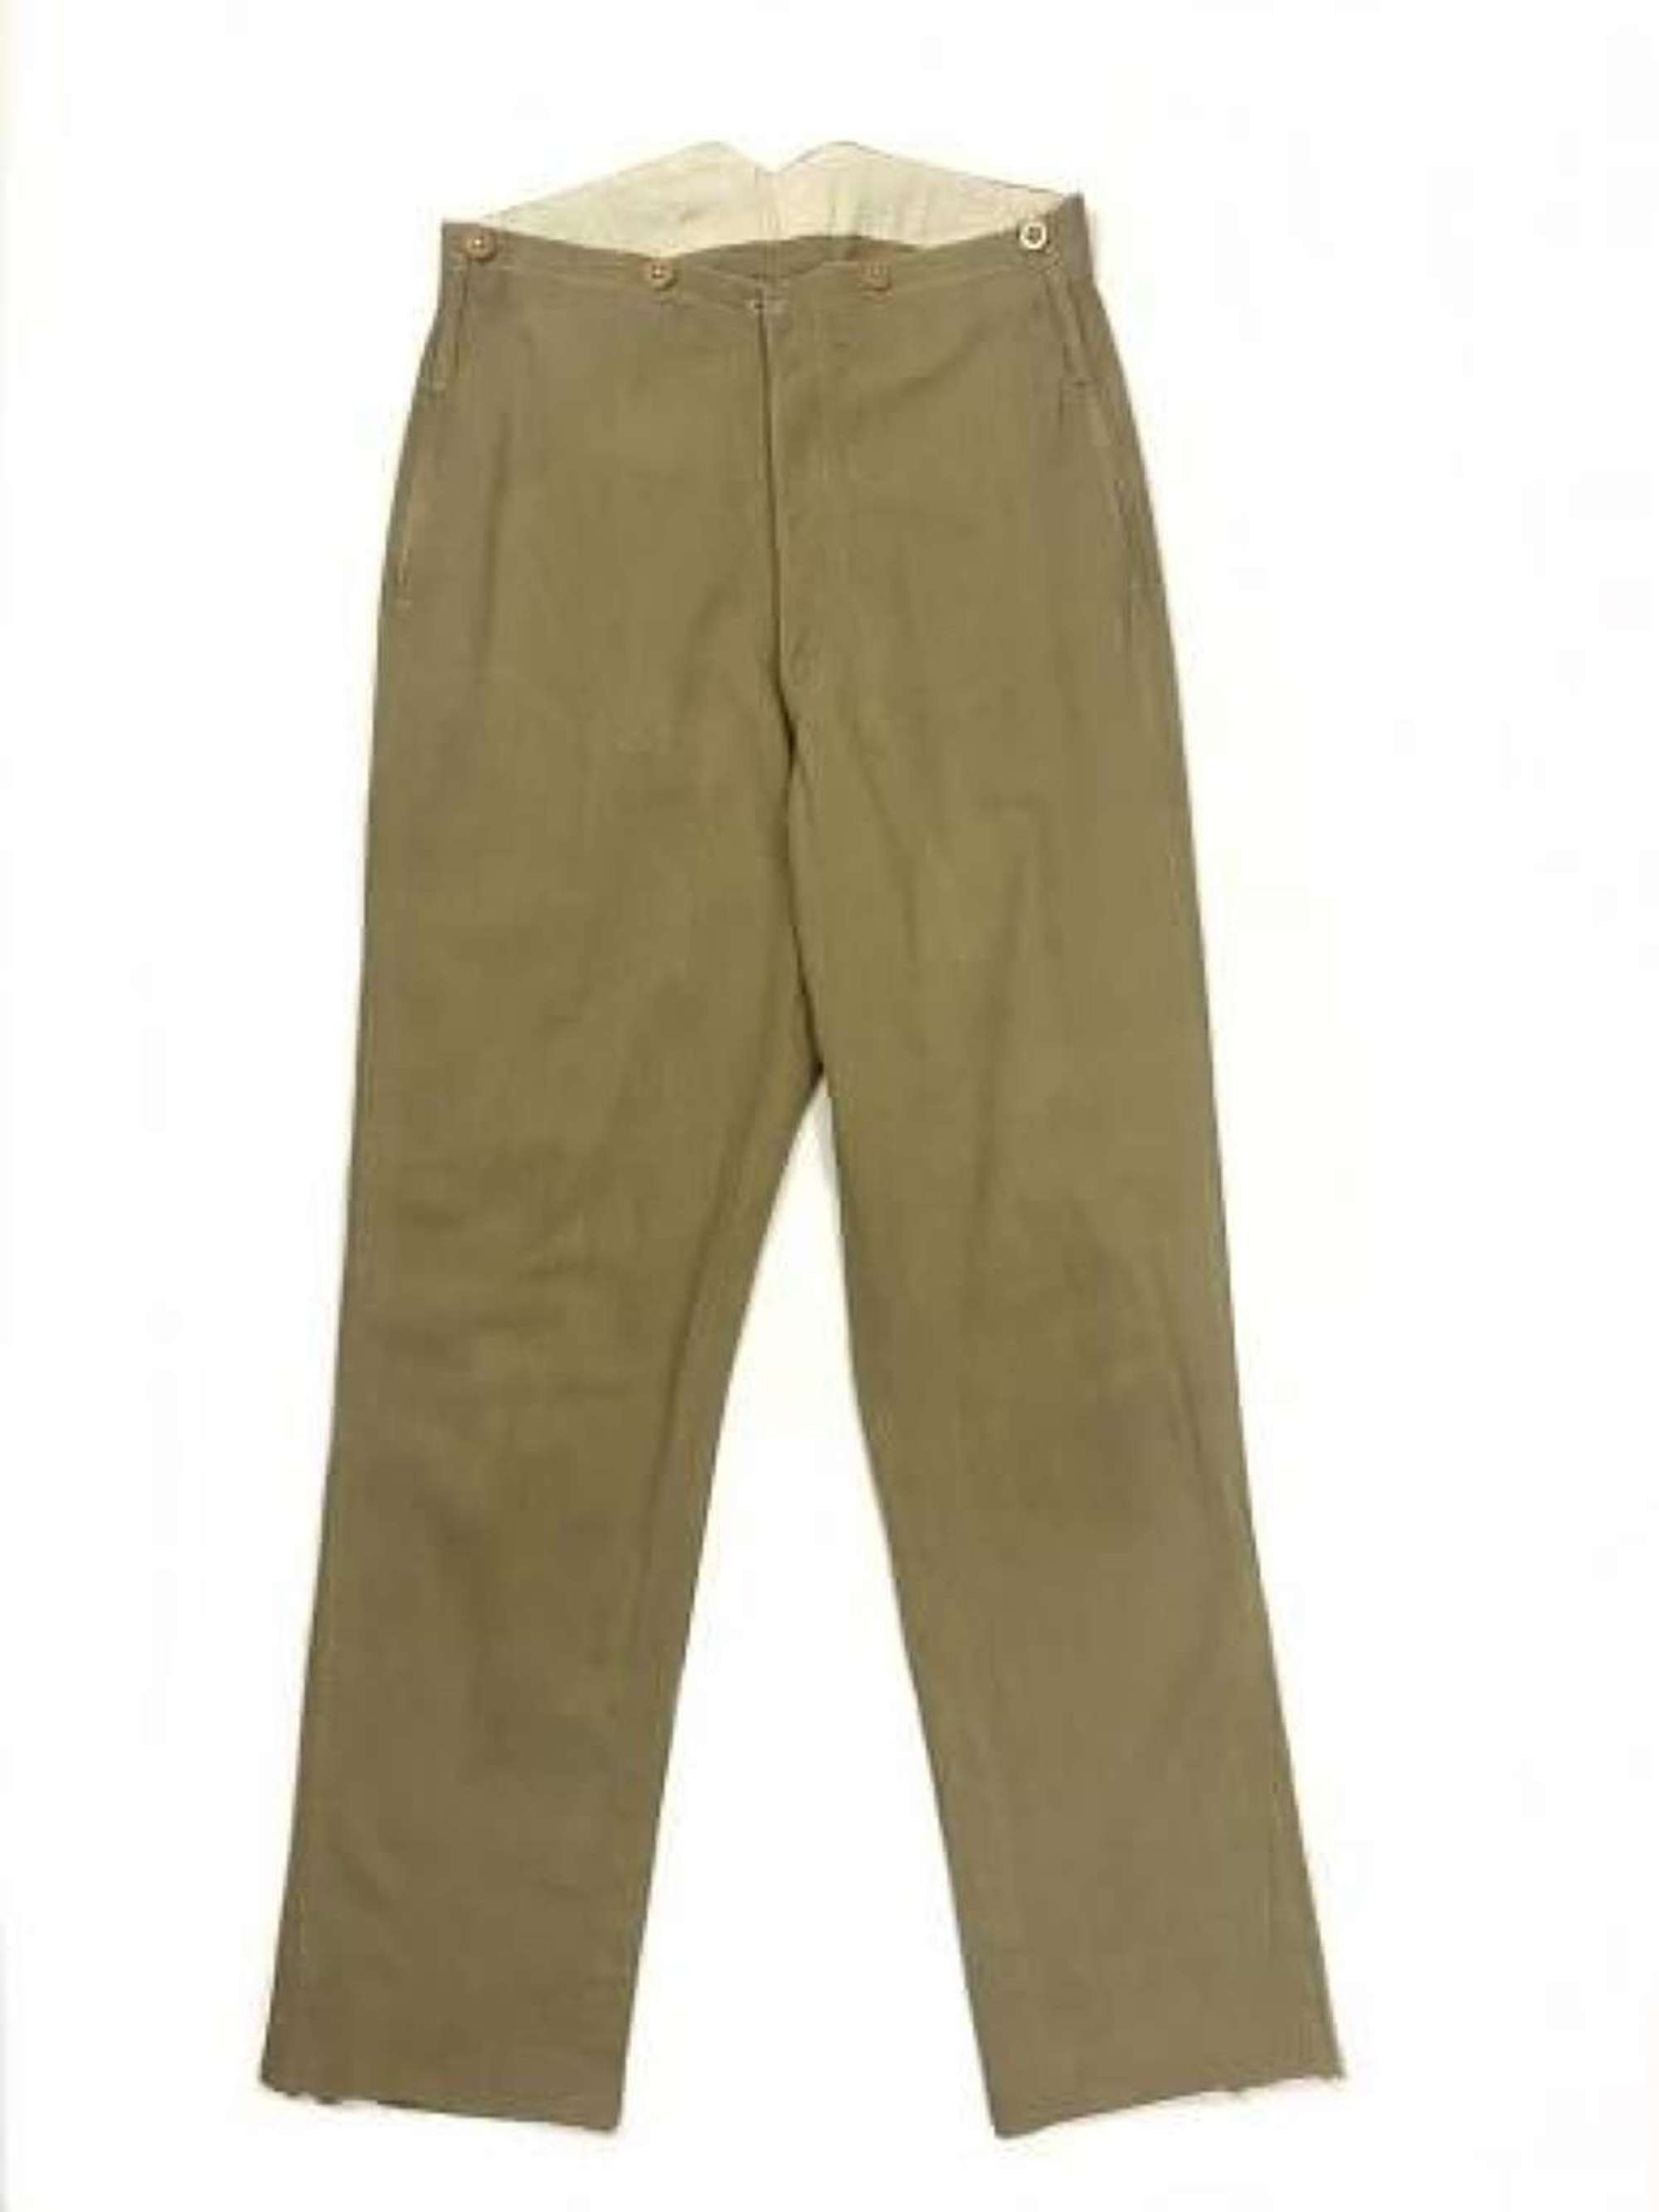 Scarce Early 20th Century British Officers Khaki Drill Trousers